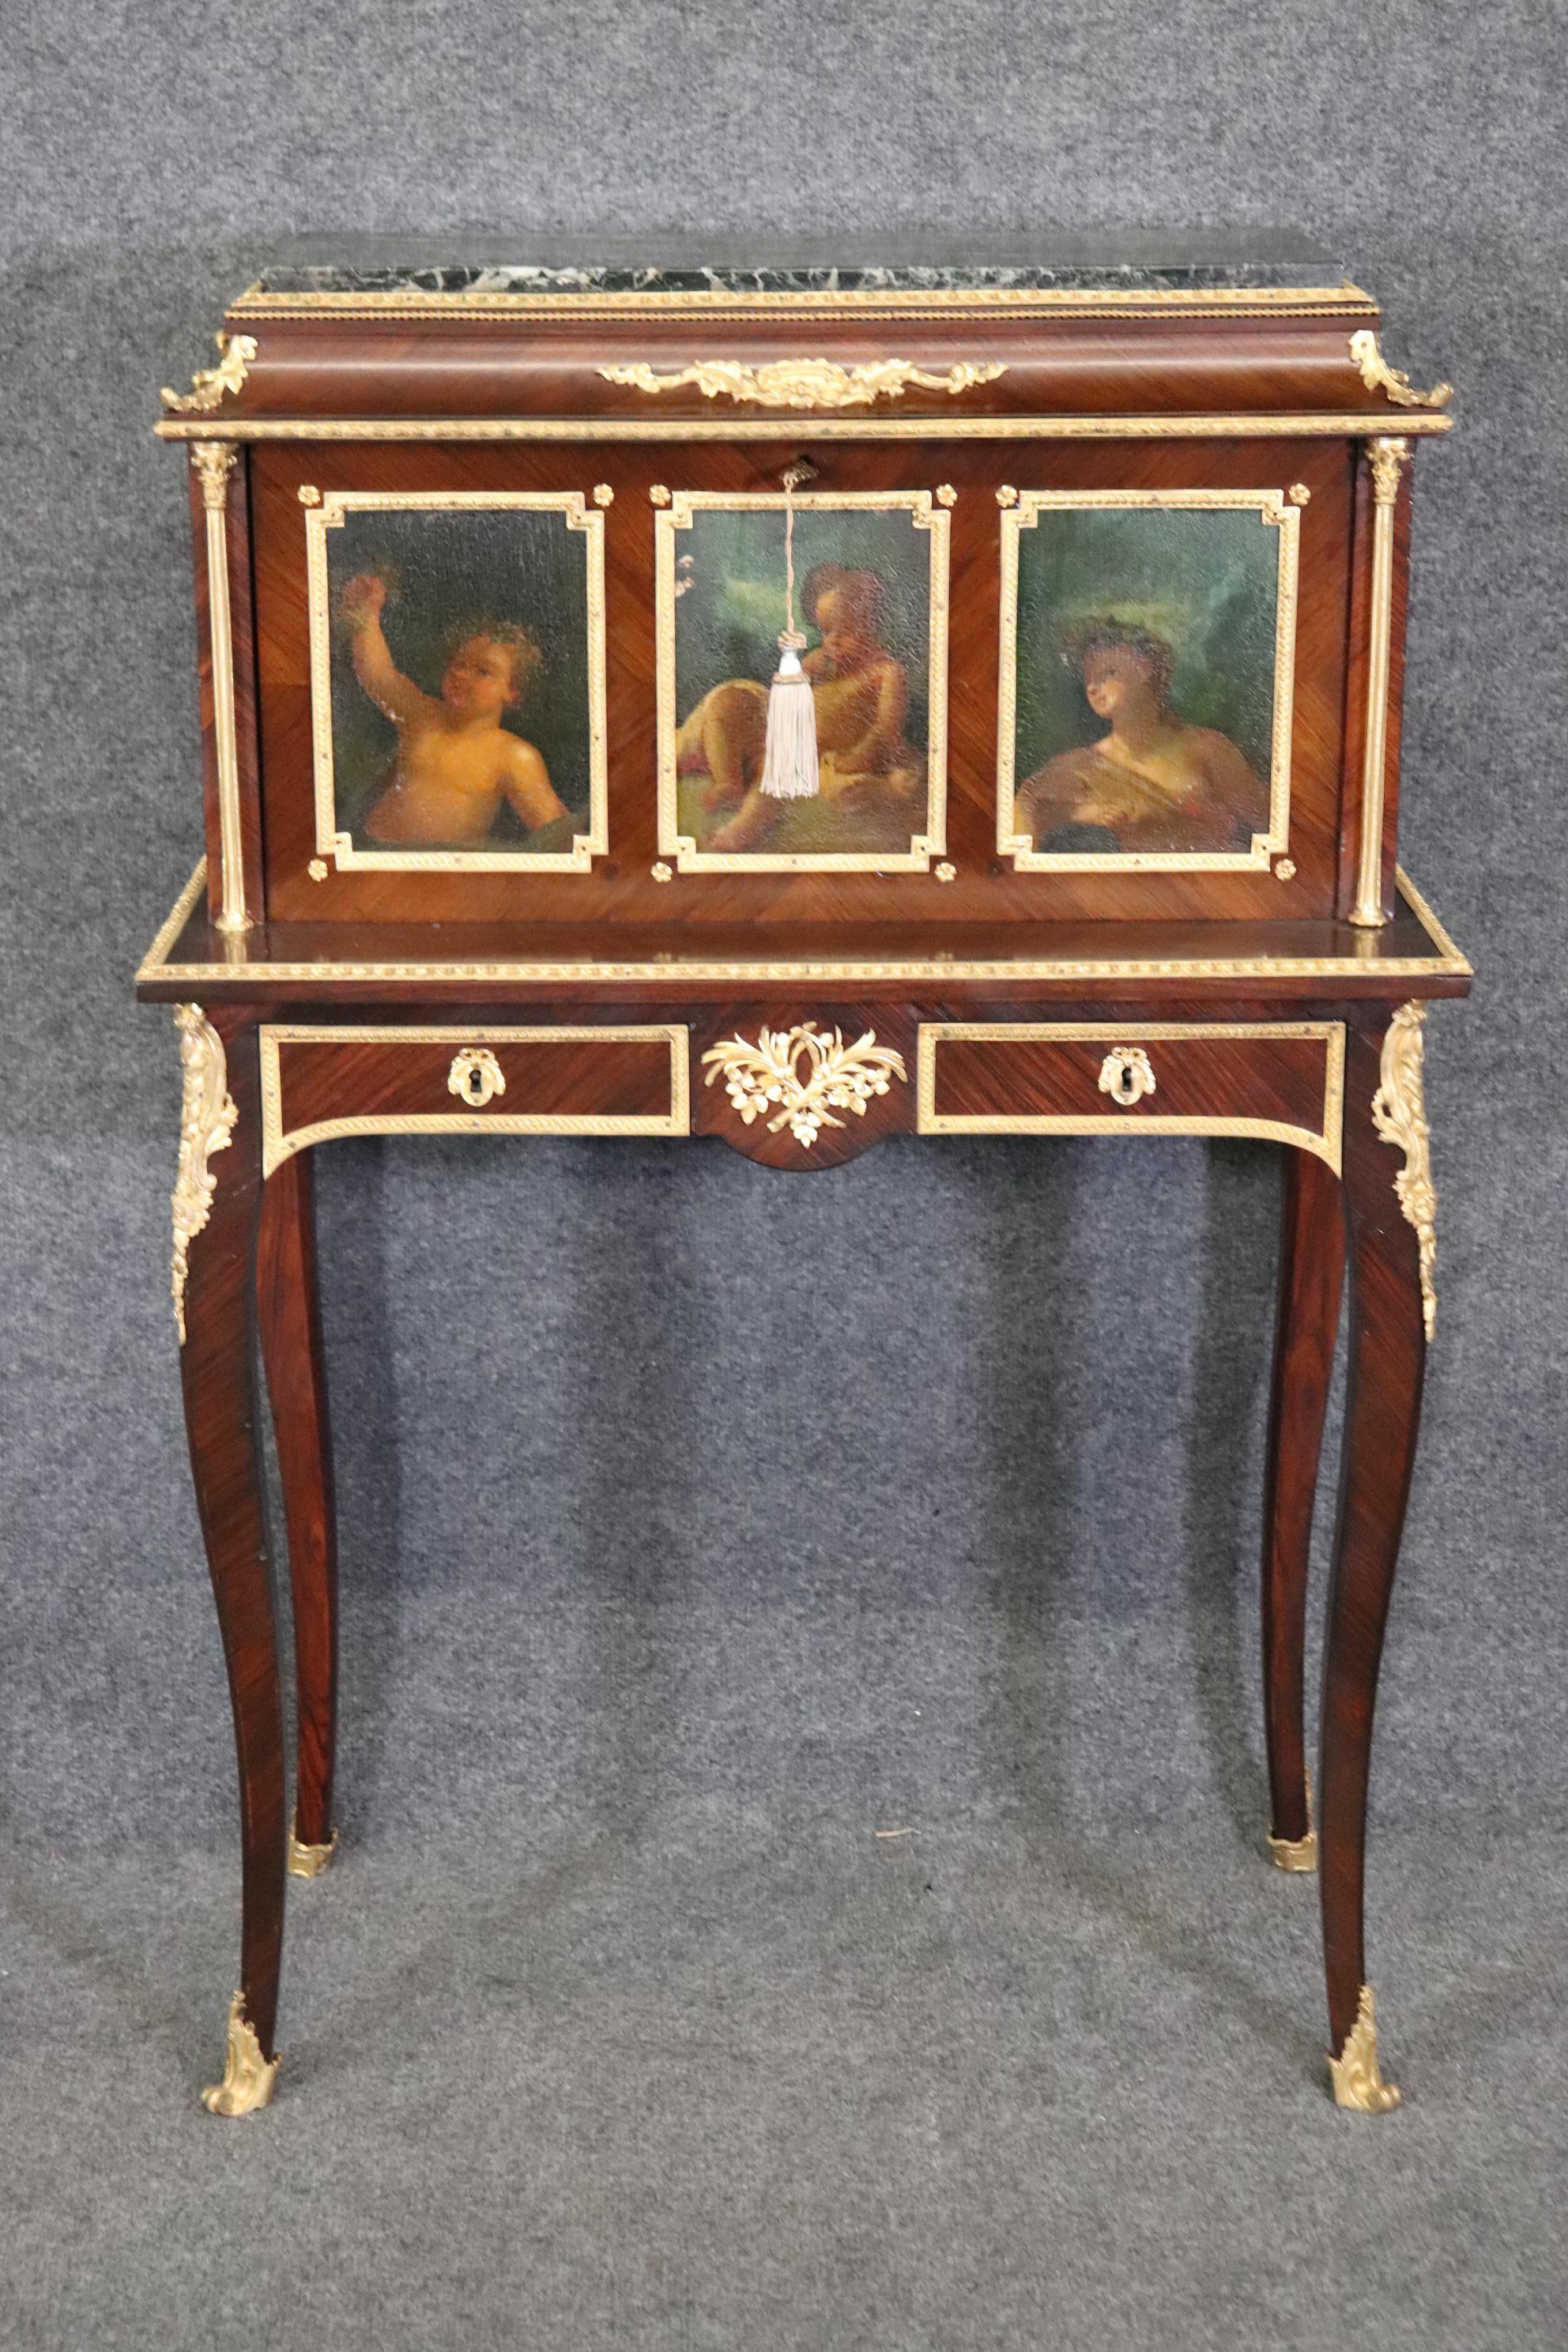 Dimensions: Height: 42 3/4 in Width: 29 3/4 in Depth: 16 1/2 in 

This exceptional Befort Jeune Louis XV style 19th century marble top mahogany sceretaire desk with bronze mounts is something to be seen! If you look at the photos provided, you can